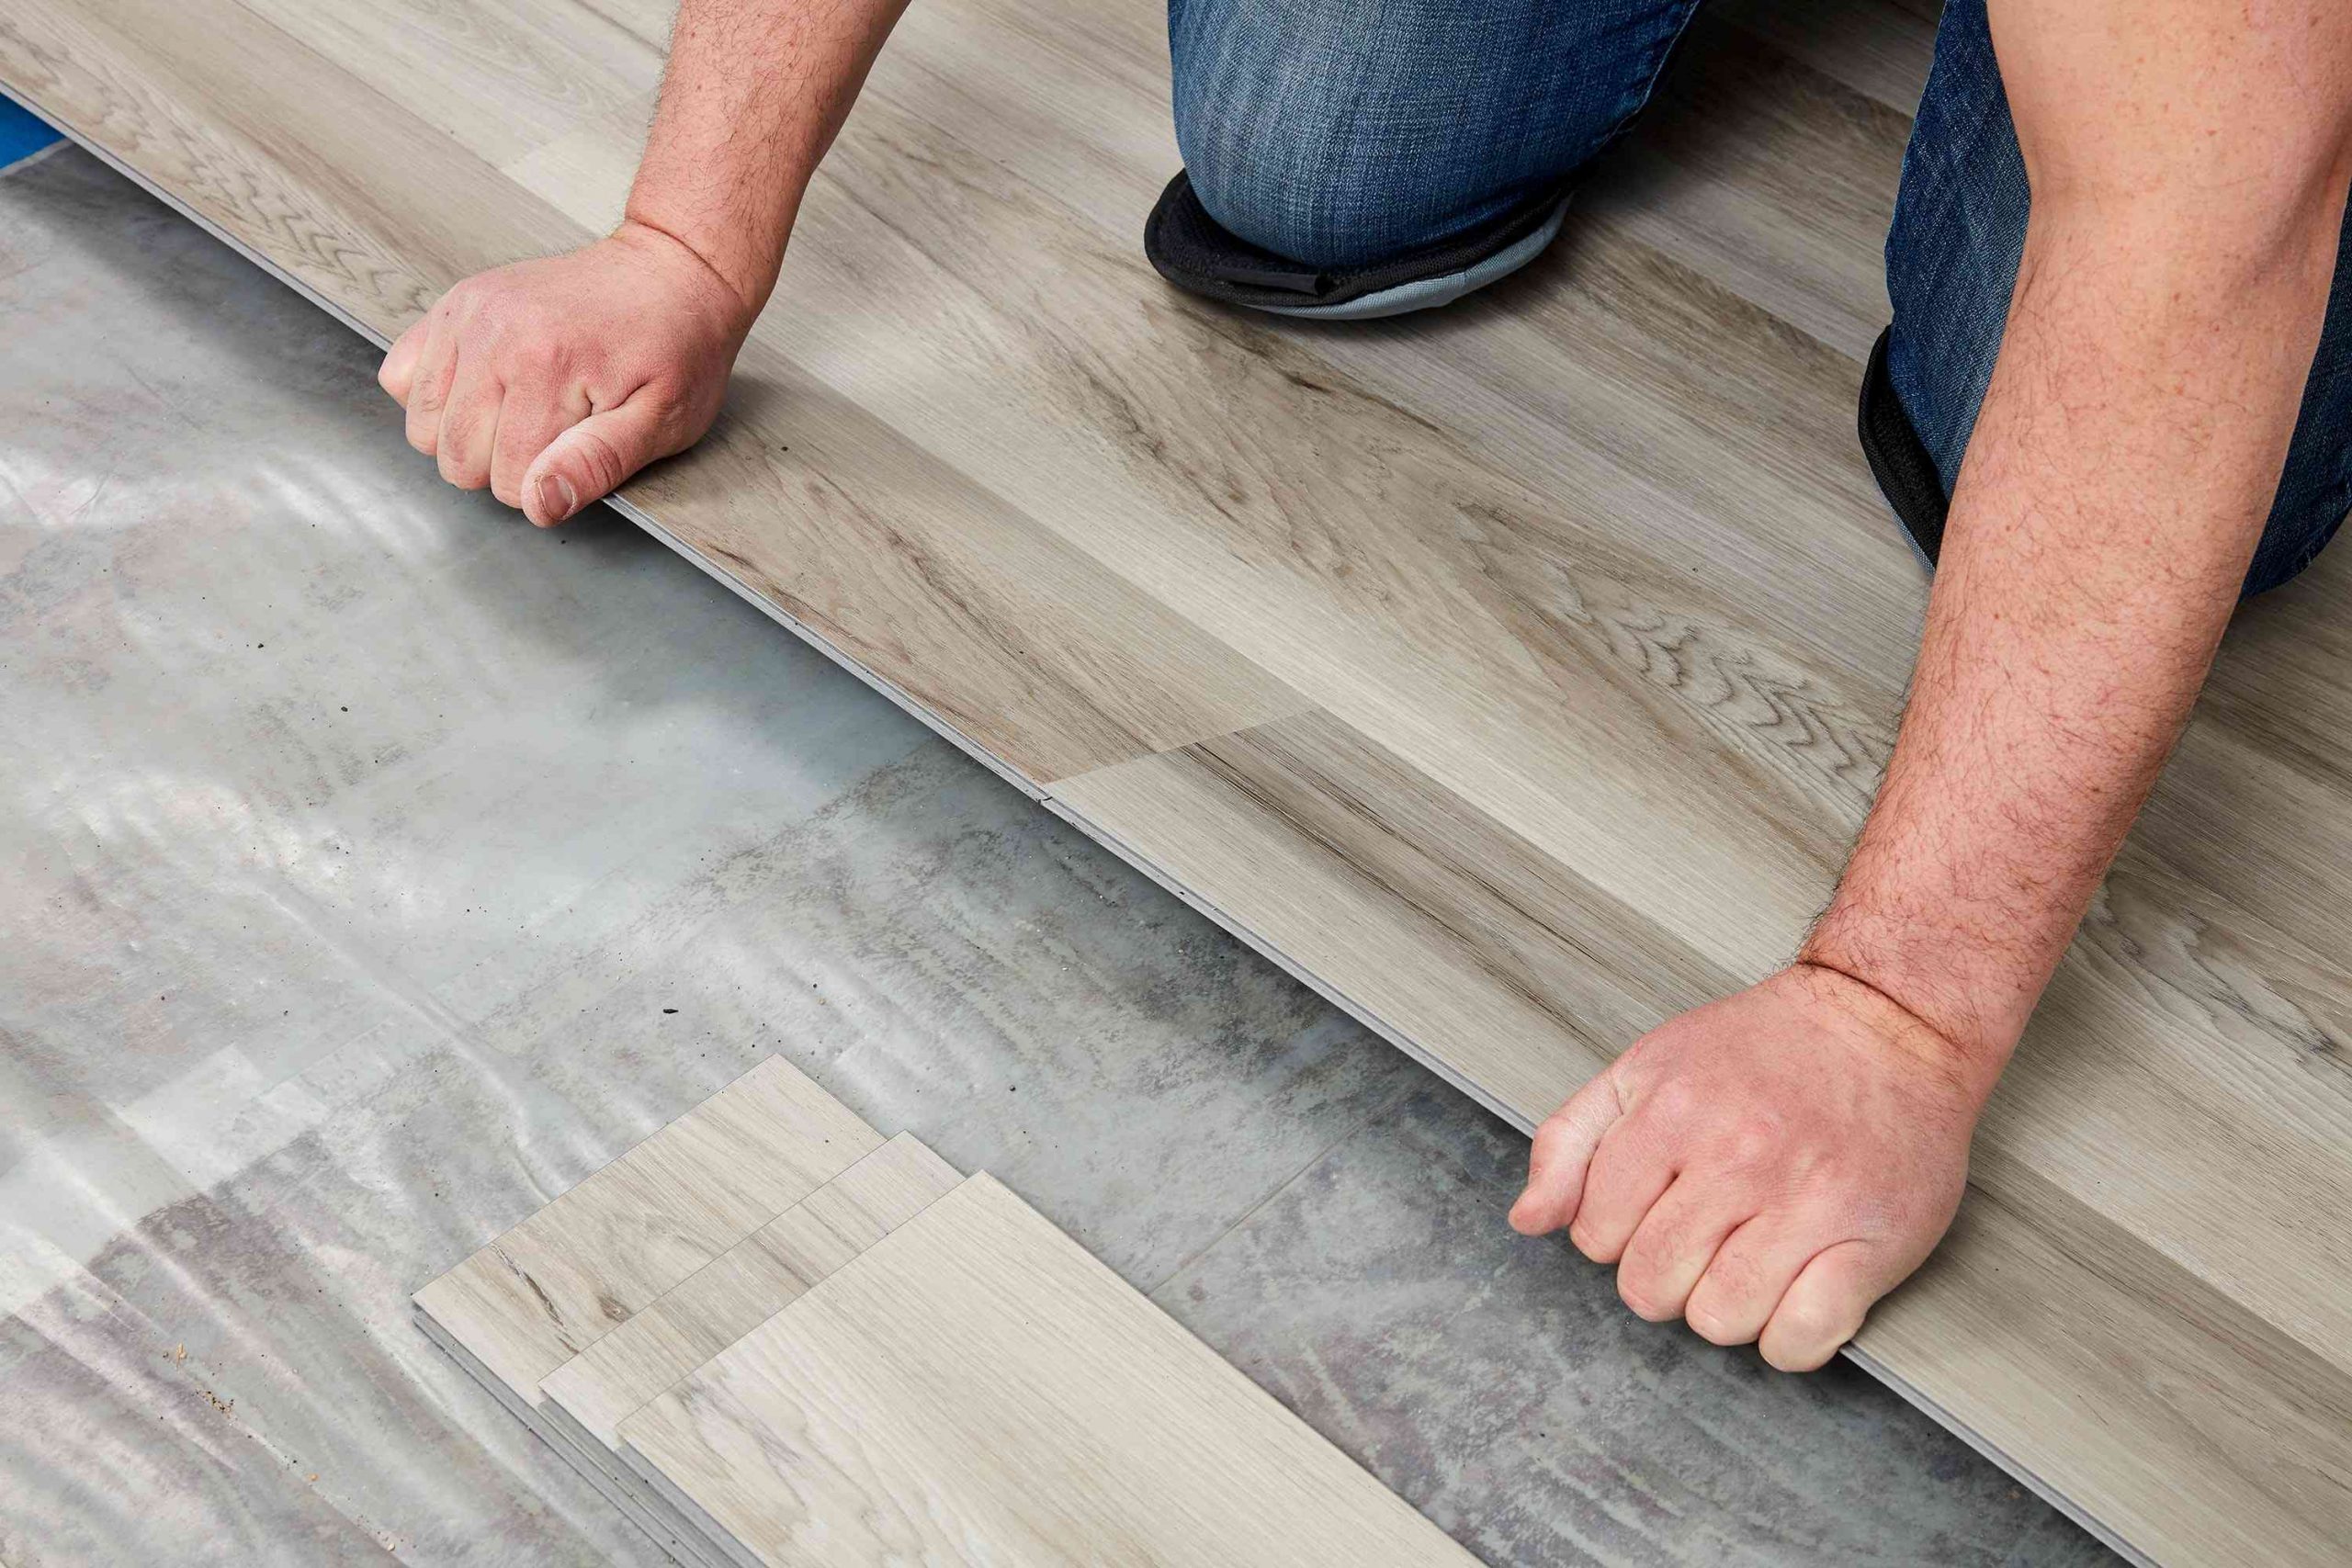 How to install vinyl plank flooring - Up To Date News - 9pmNews.Com